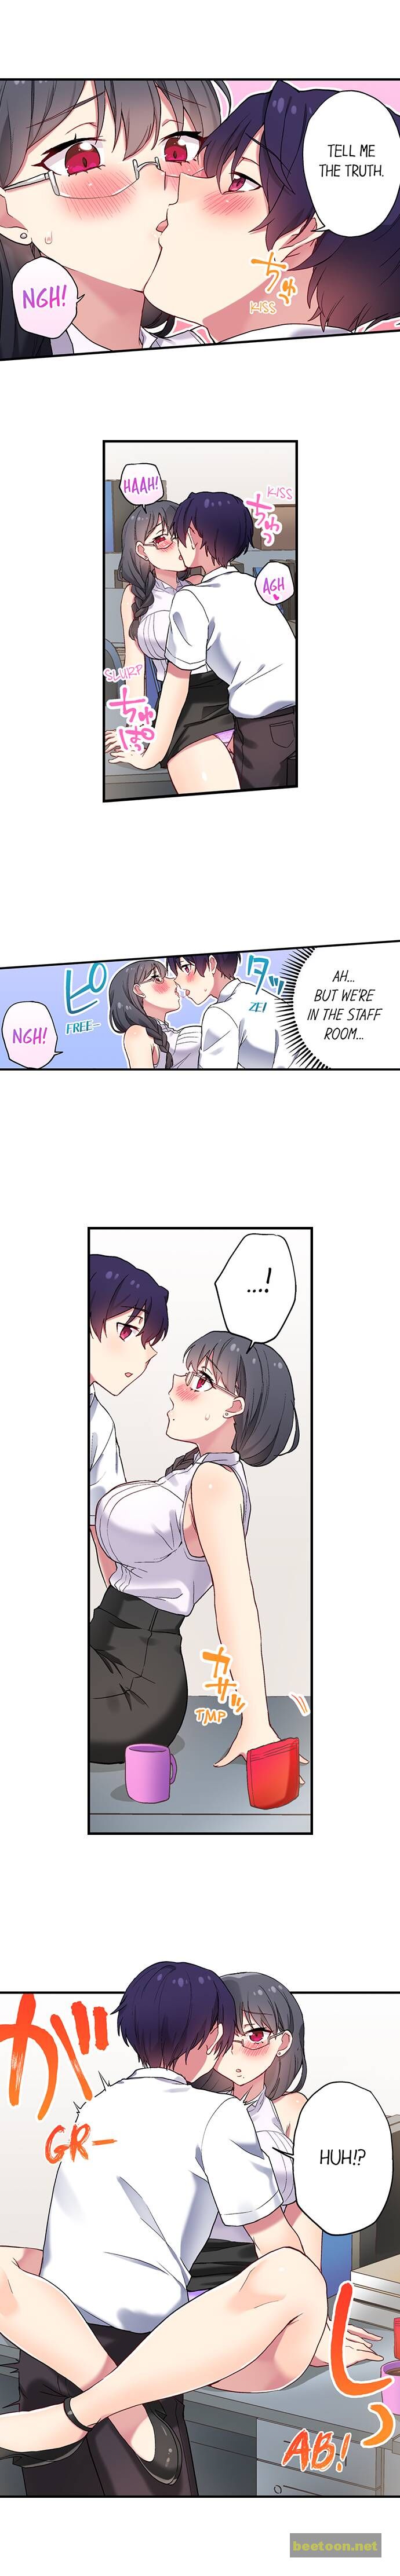 I Can See The Number Of Times People Orgasm Chapter 110 - HolyManga.net